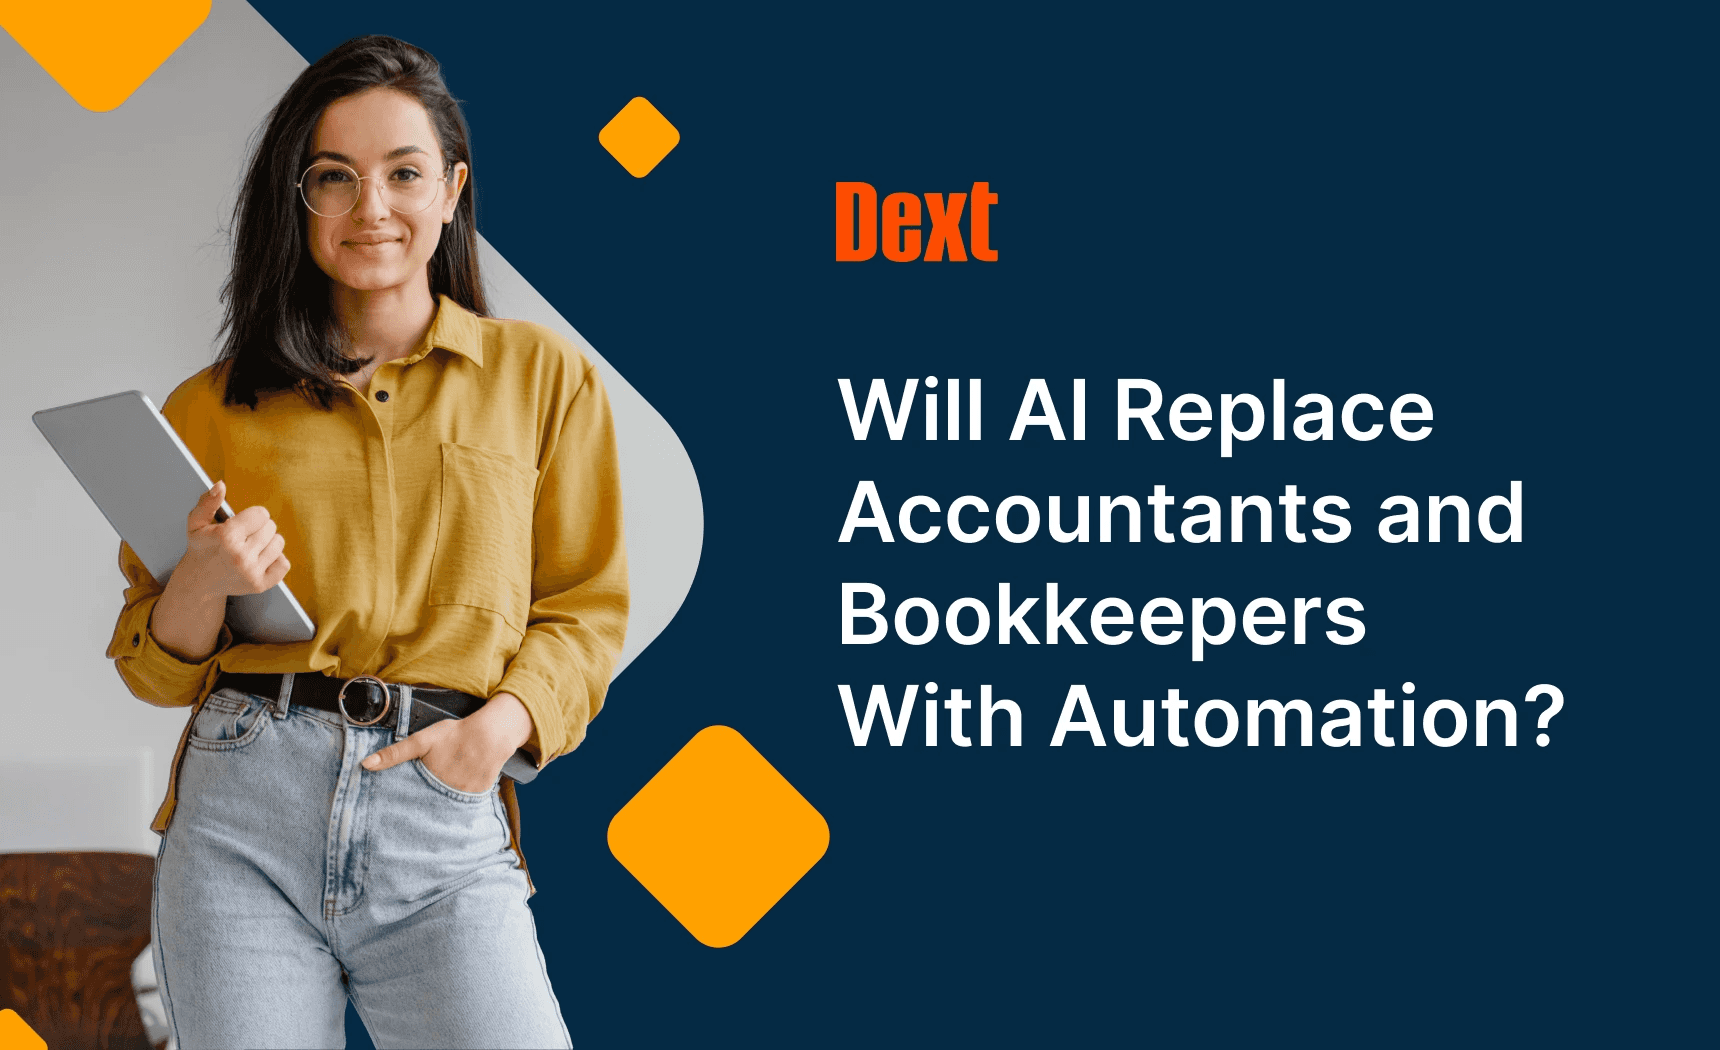 Will AI Replace Accountants and Bookkeepers With Automation?